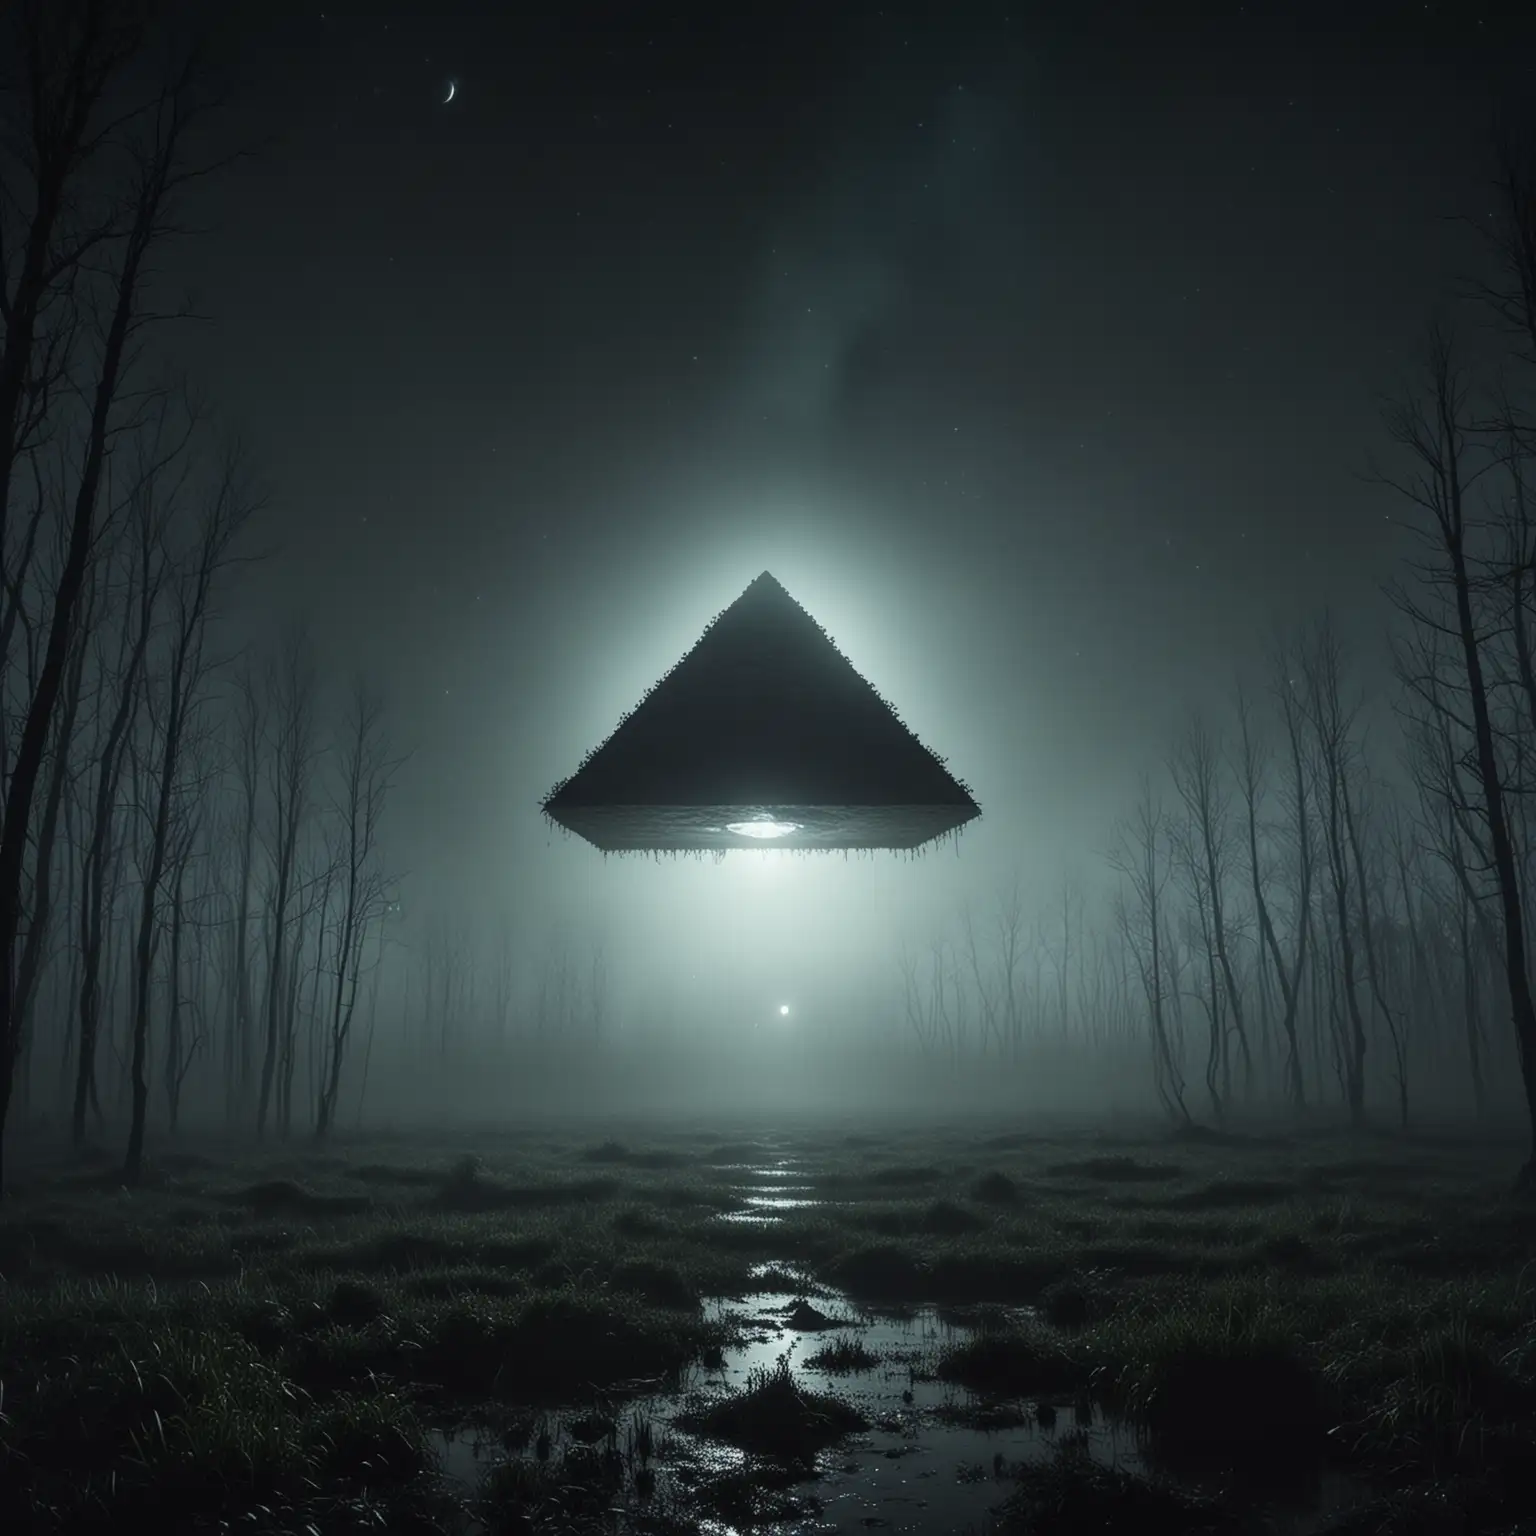 Mysterious Pyramid UFO Hovering Over Dark Forest at Night